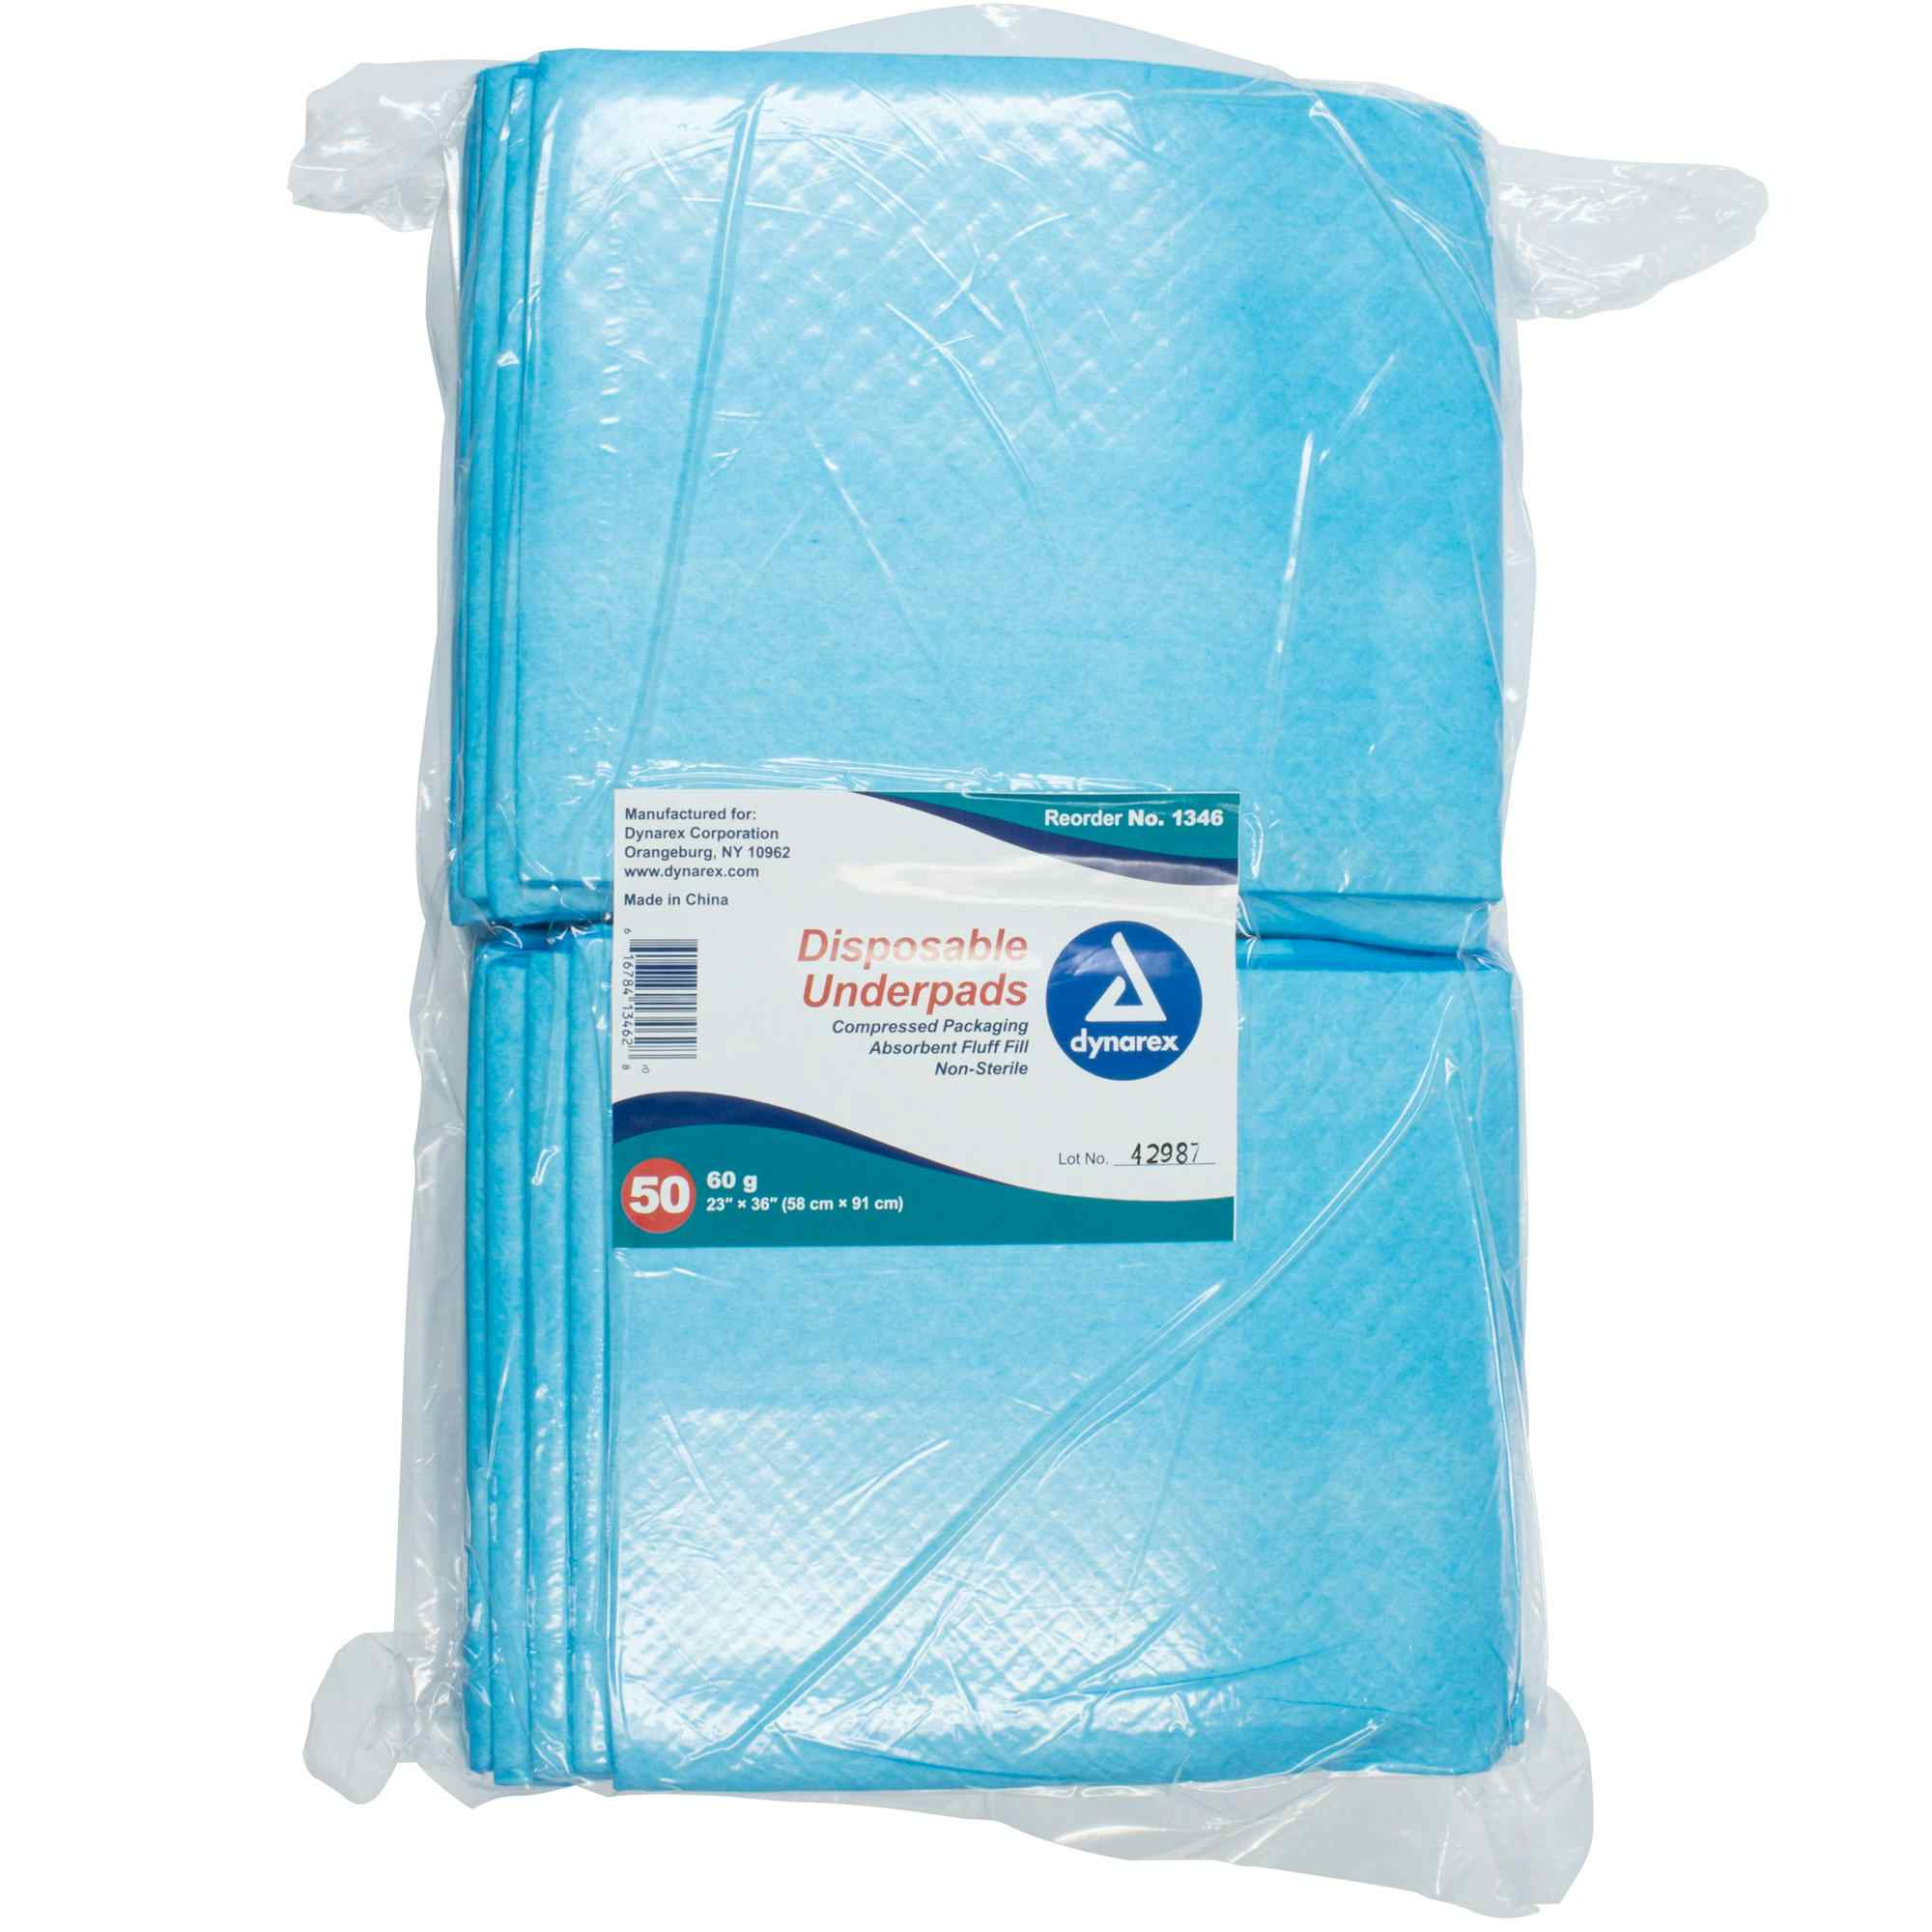 Dynarex Disposable Underpad, Light Absorbency, 1346, 23 X 36" - Bag of 50